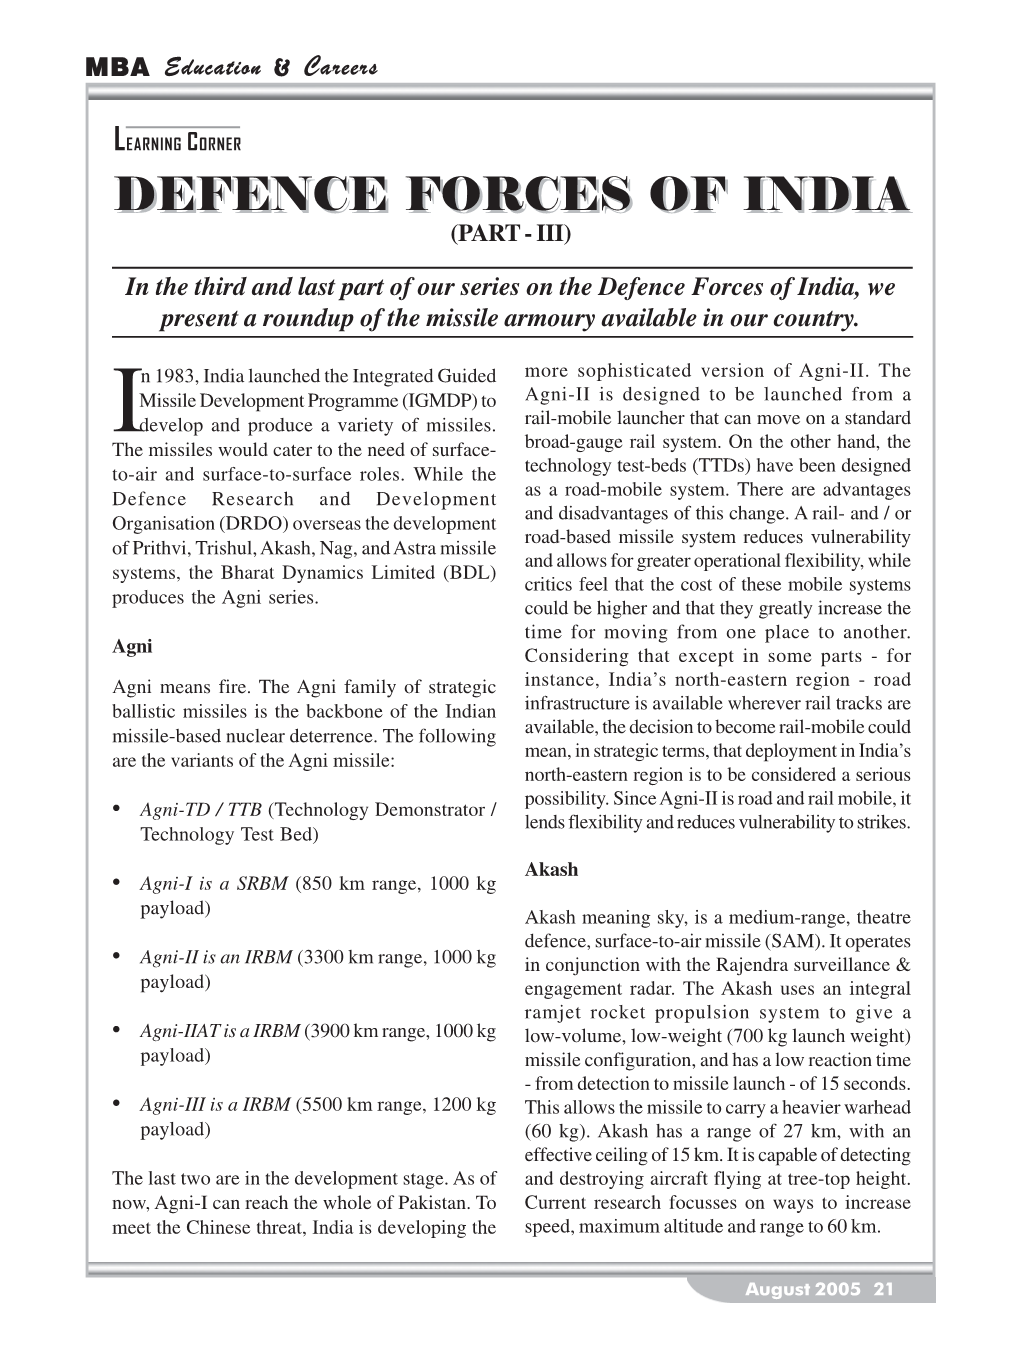 Defence Forces of India (Part III)